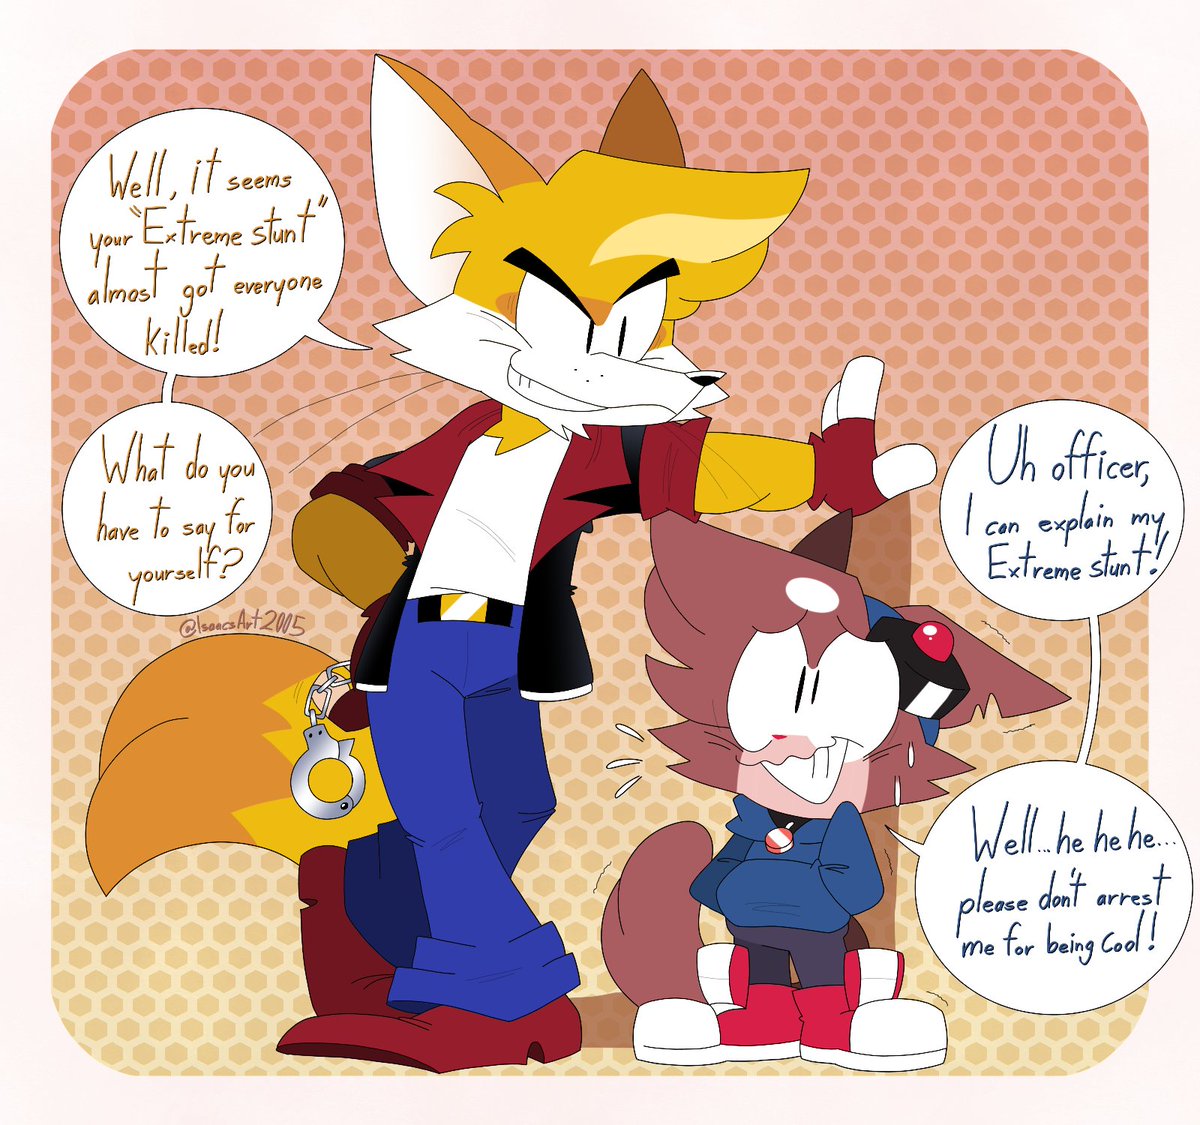 Murphy is known for his crazy ideas for stunts, but how much does it take for Tracii to finally catch up to Murph? 🦊🐱🛹🏍👮‍♂️ Murphy by @ajmarekart #OC #fennec #murphyandmitzi #comic